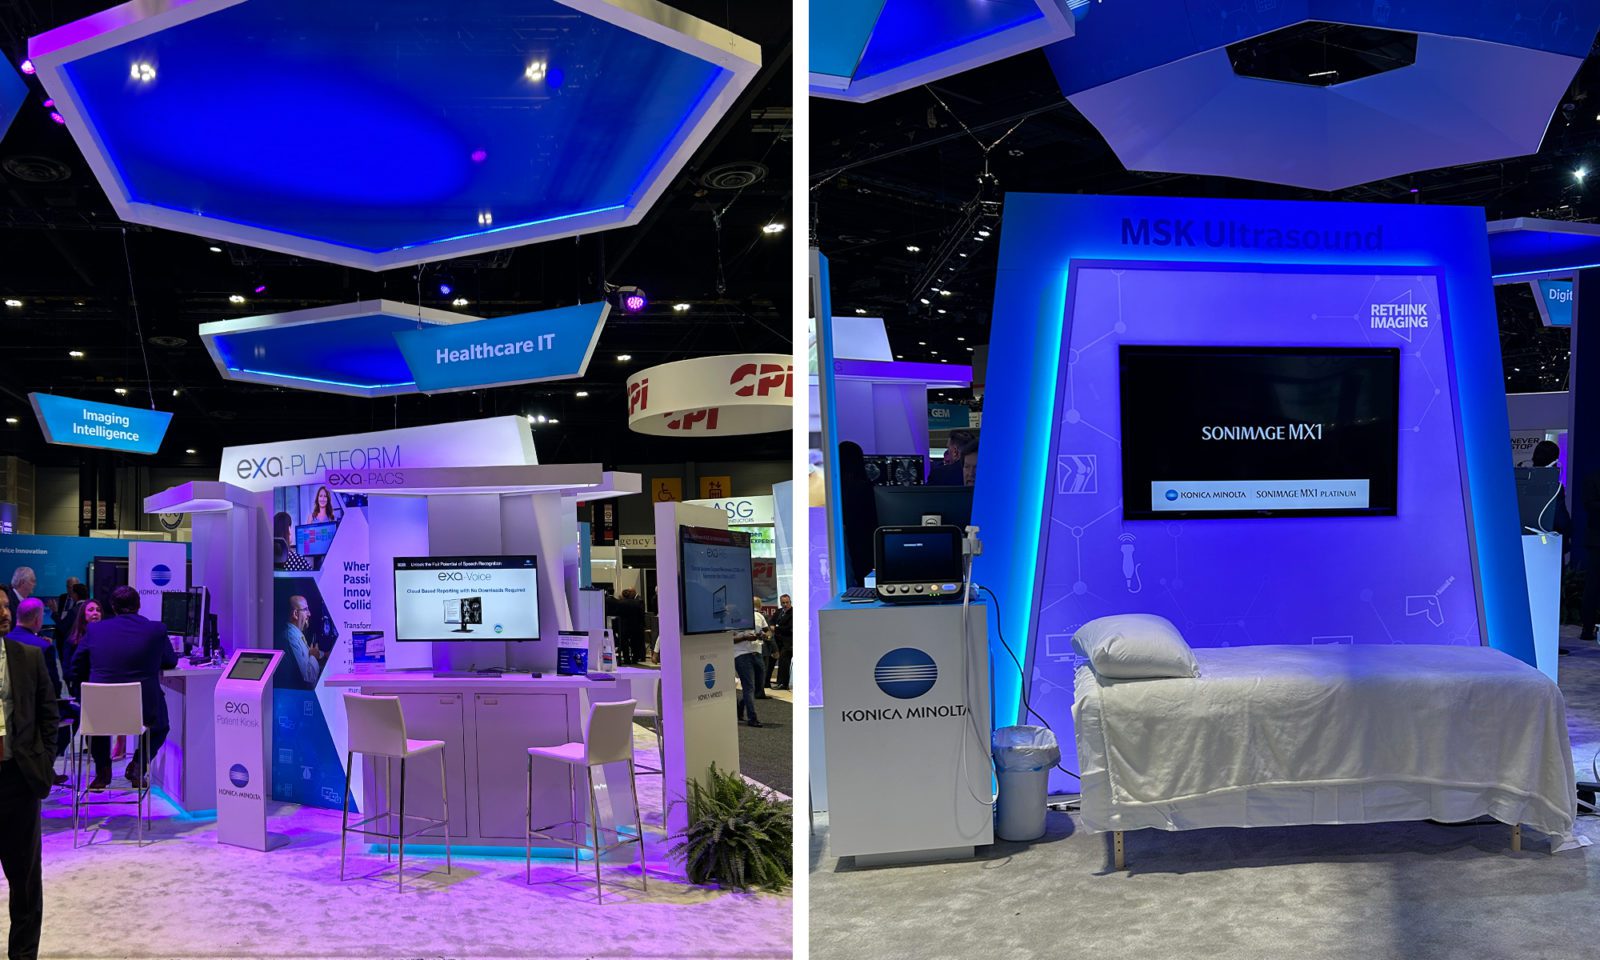 Two of the stations within Konica Minolta's exhibit